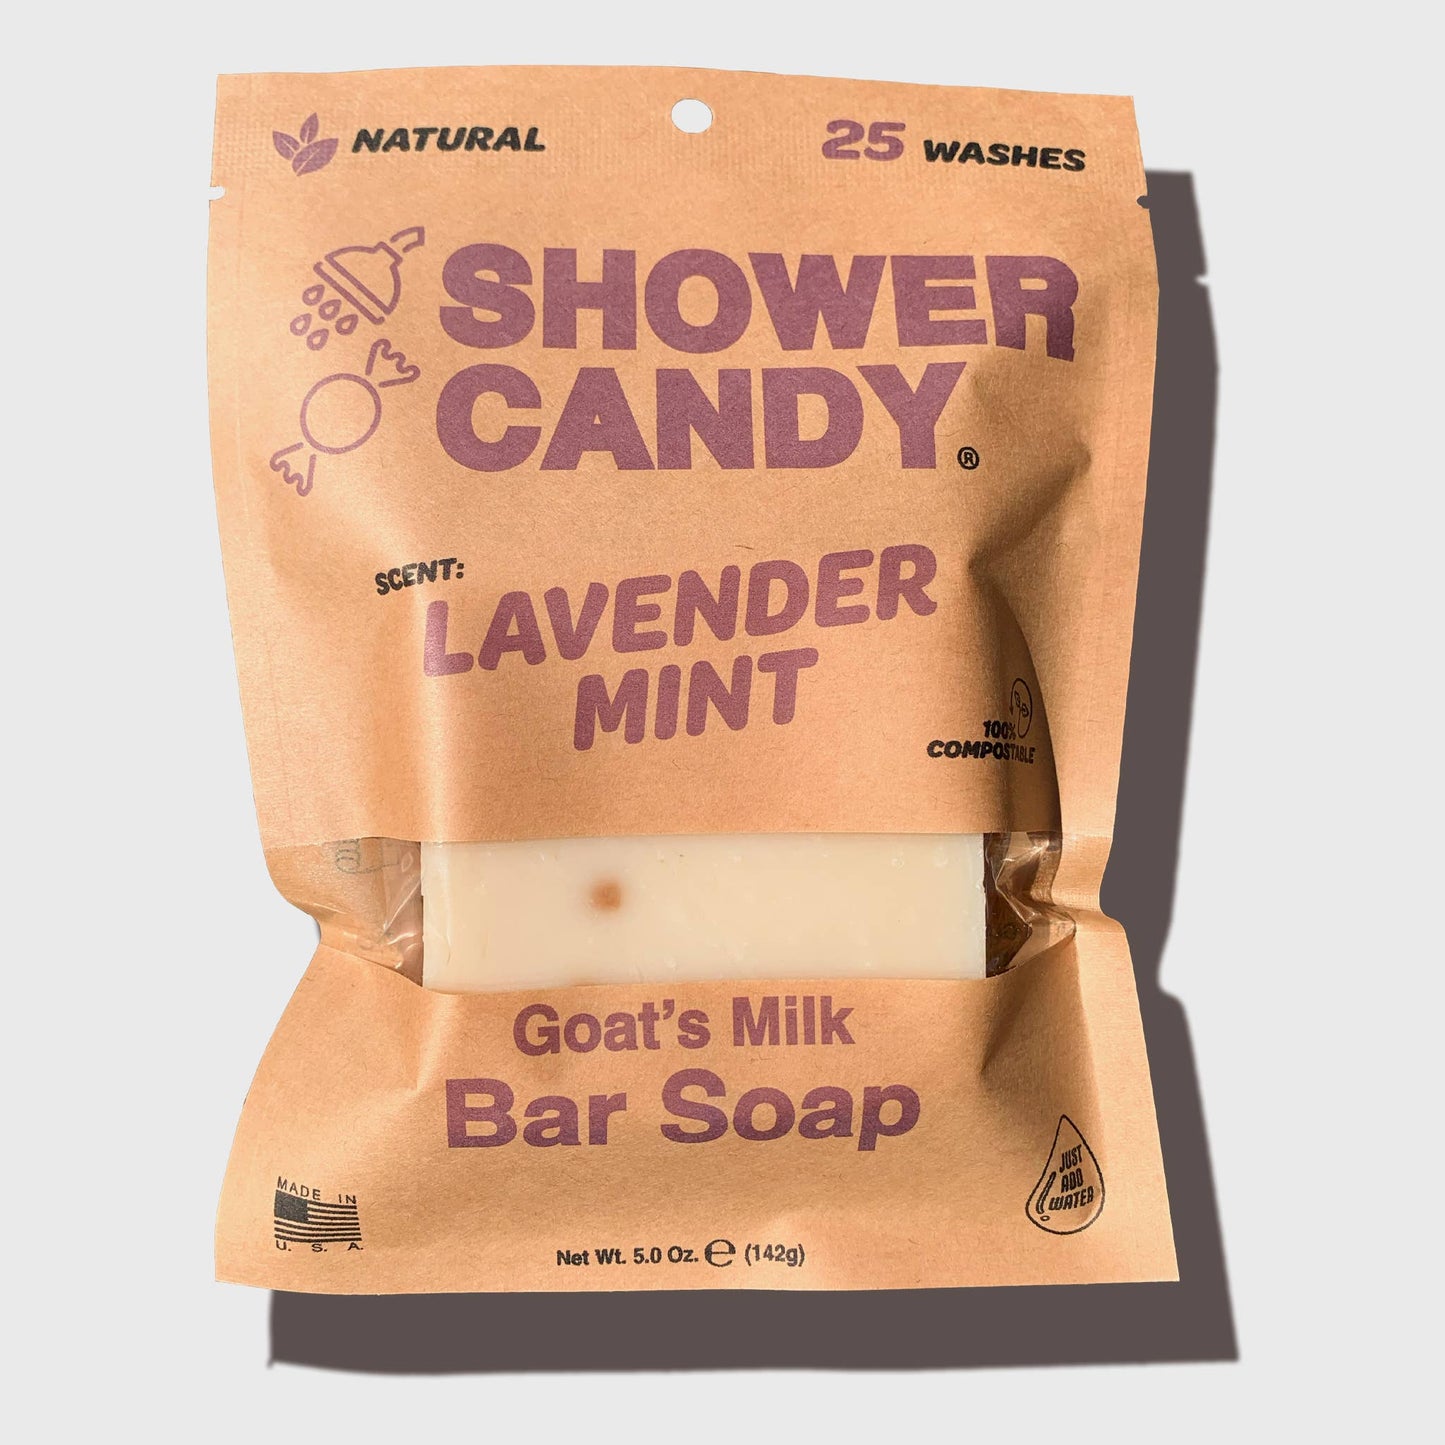 Shower Candy - Lavender Mint Body Wash Bar Soap with Goat's Milk